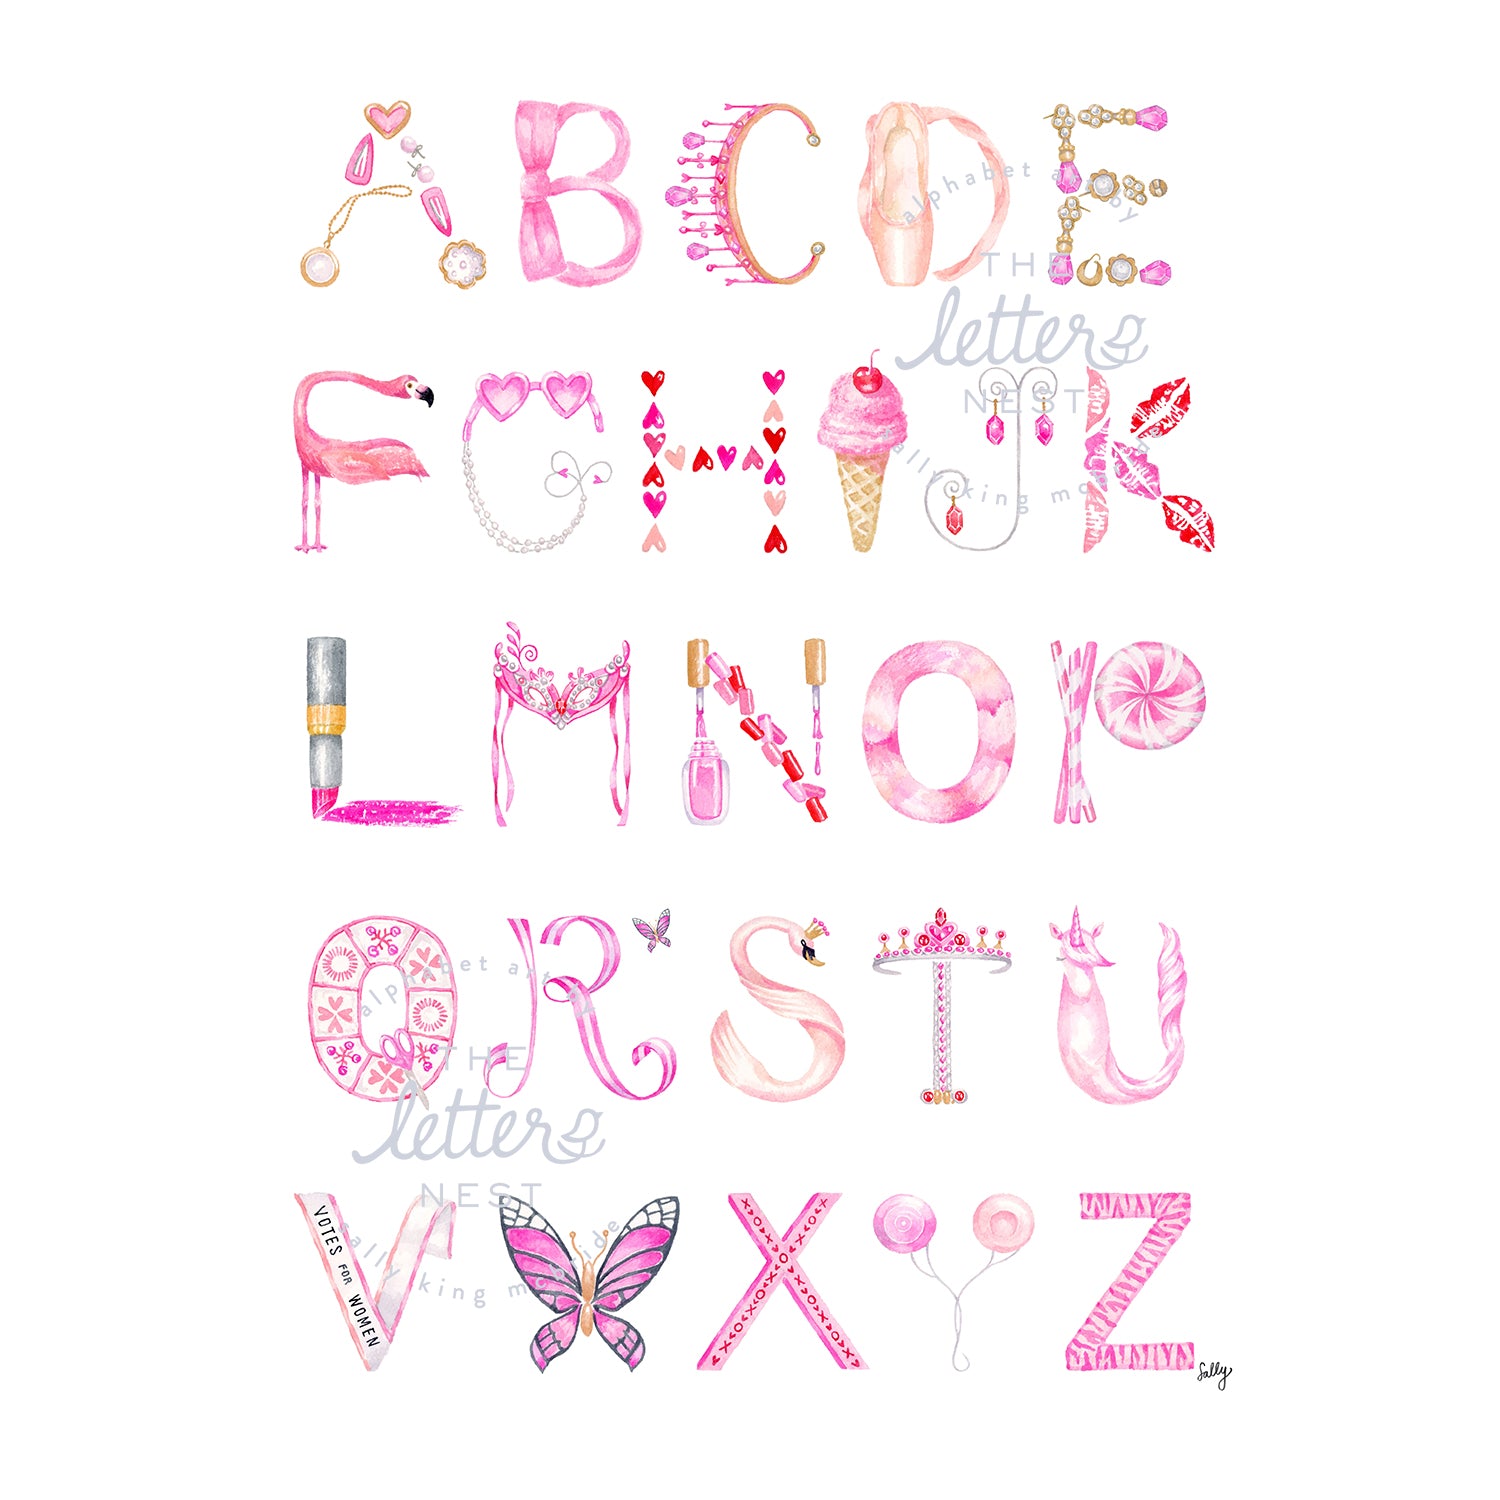 Annabel Alphabet letters that can be used in Custom Name Prints